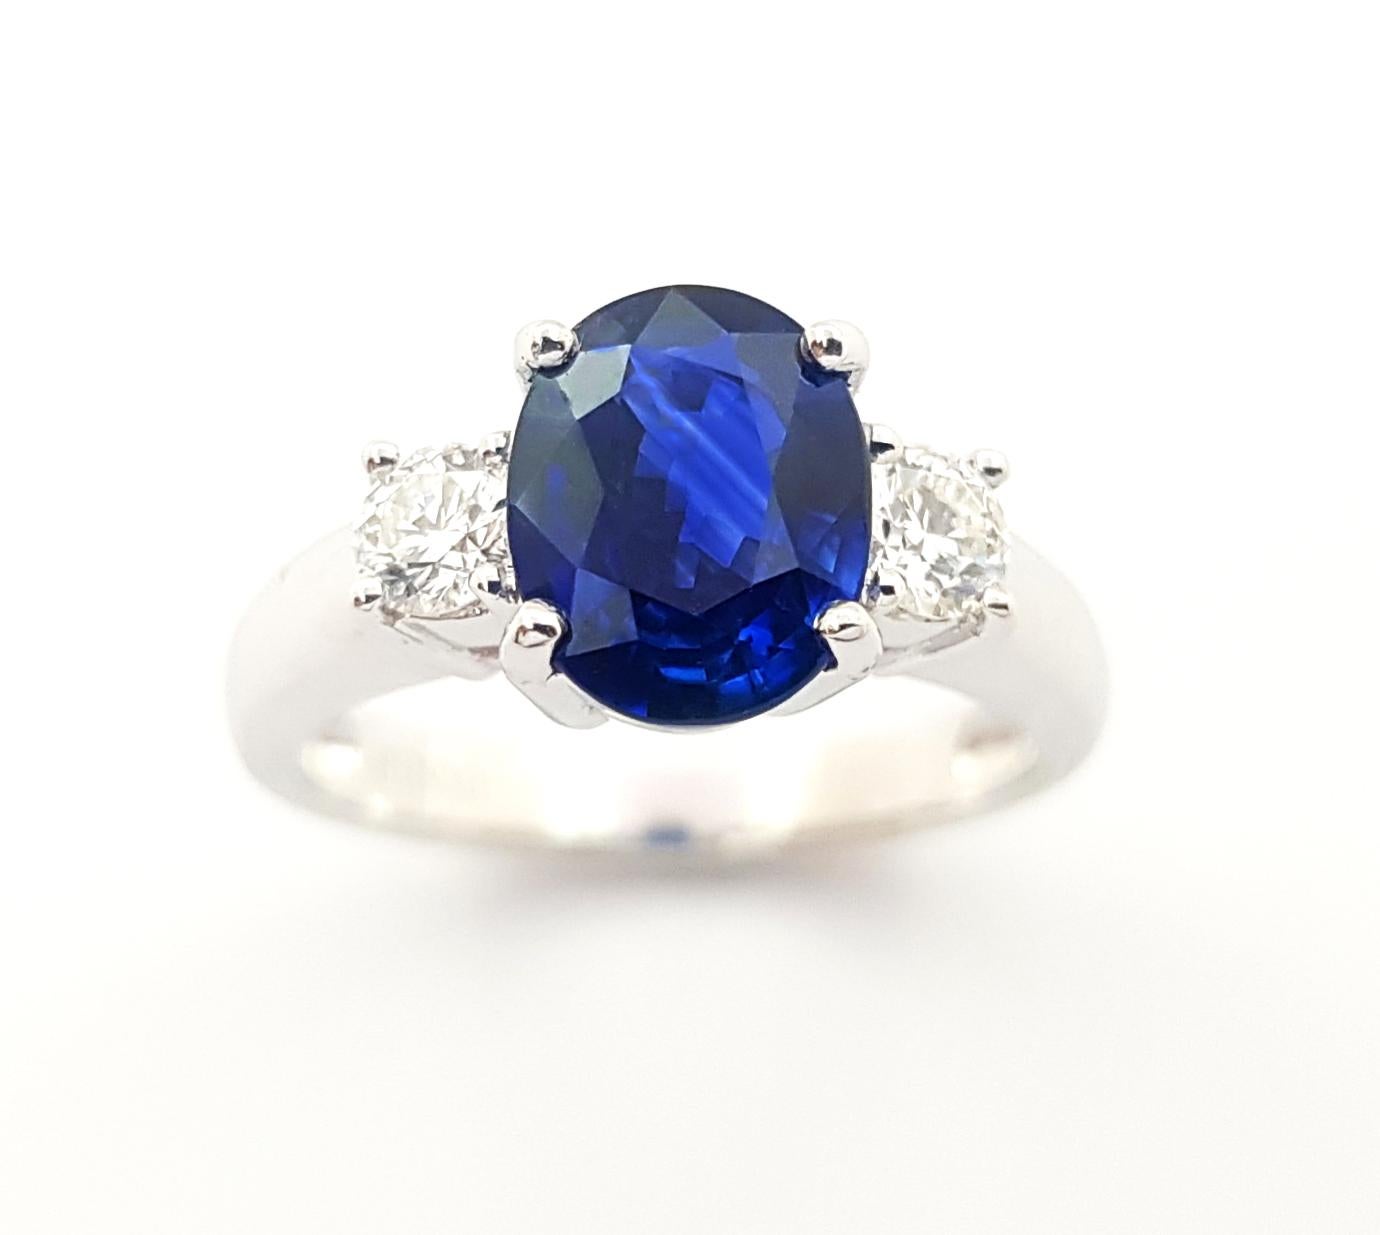 GIA Certified 2.50 cts Blue Sapphire with Diamond Ring set in Platinum 950  For Sale 3